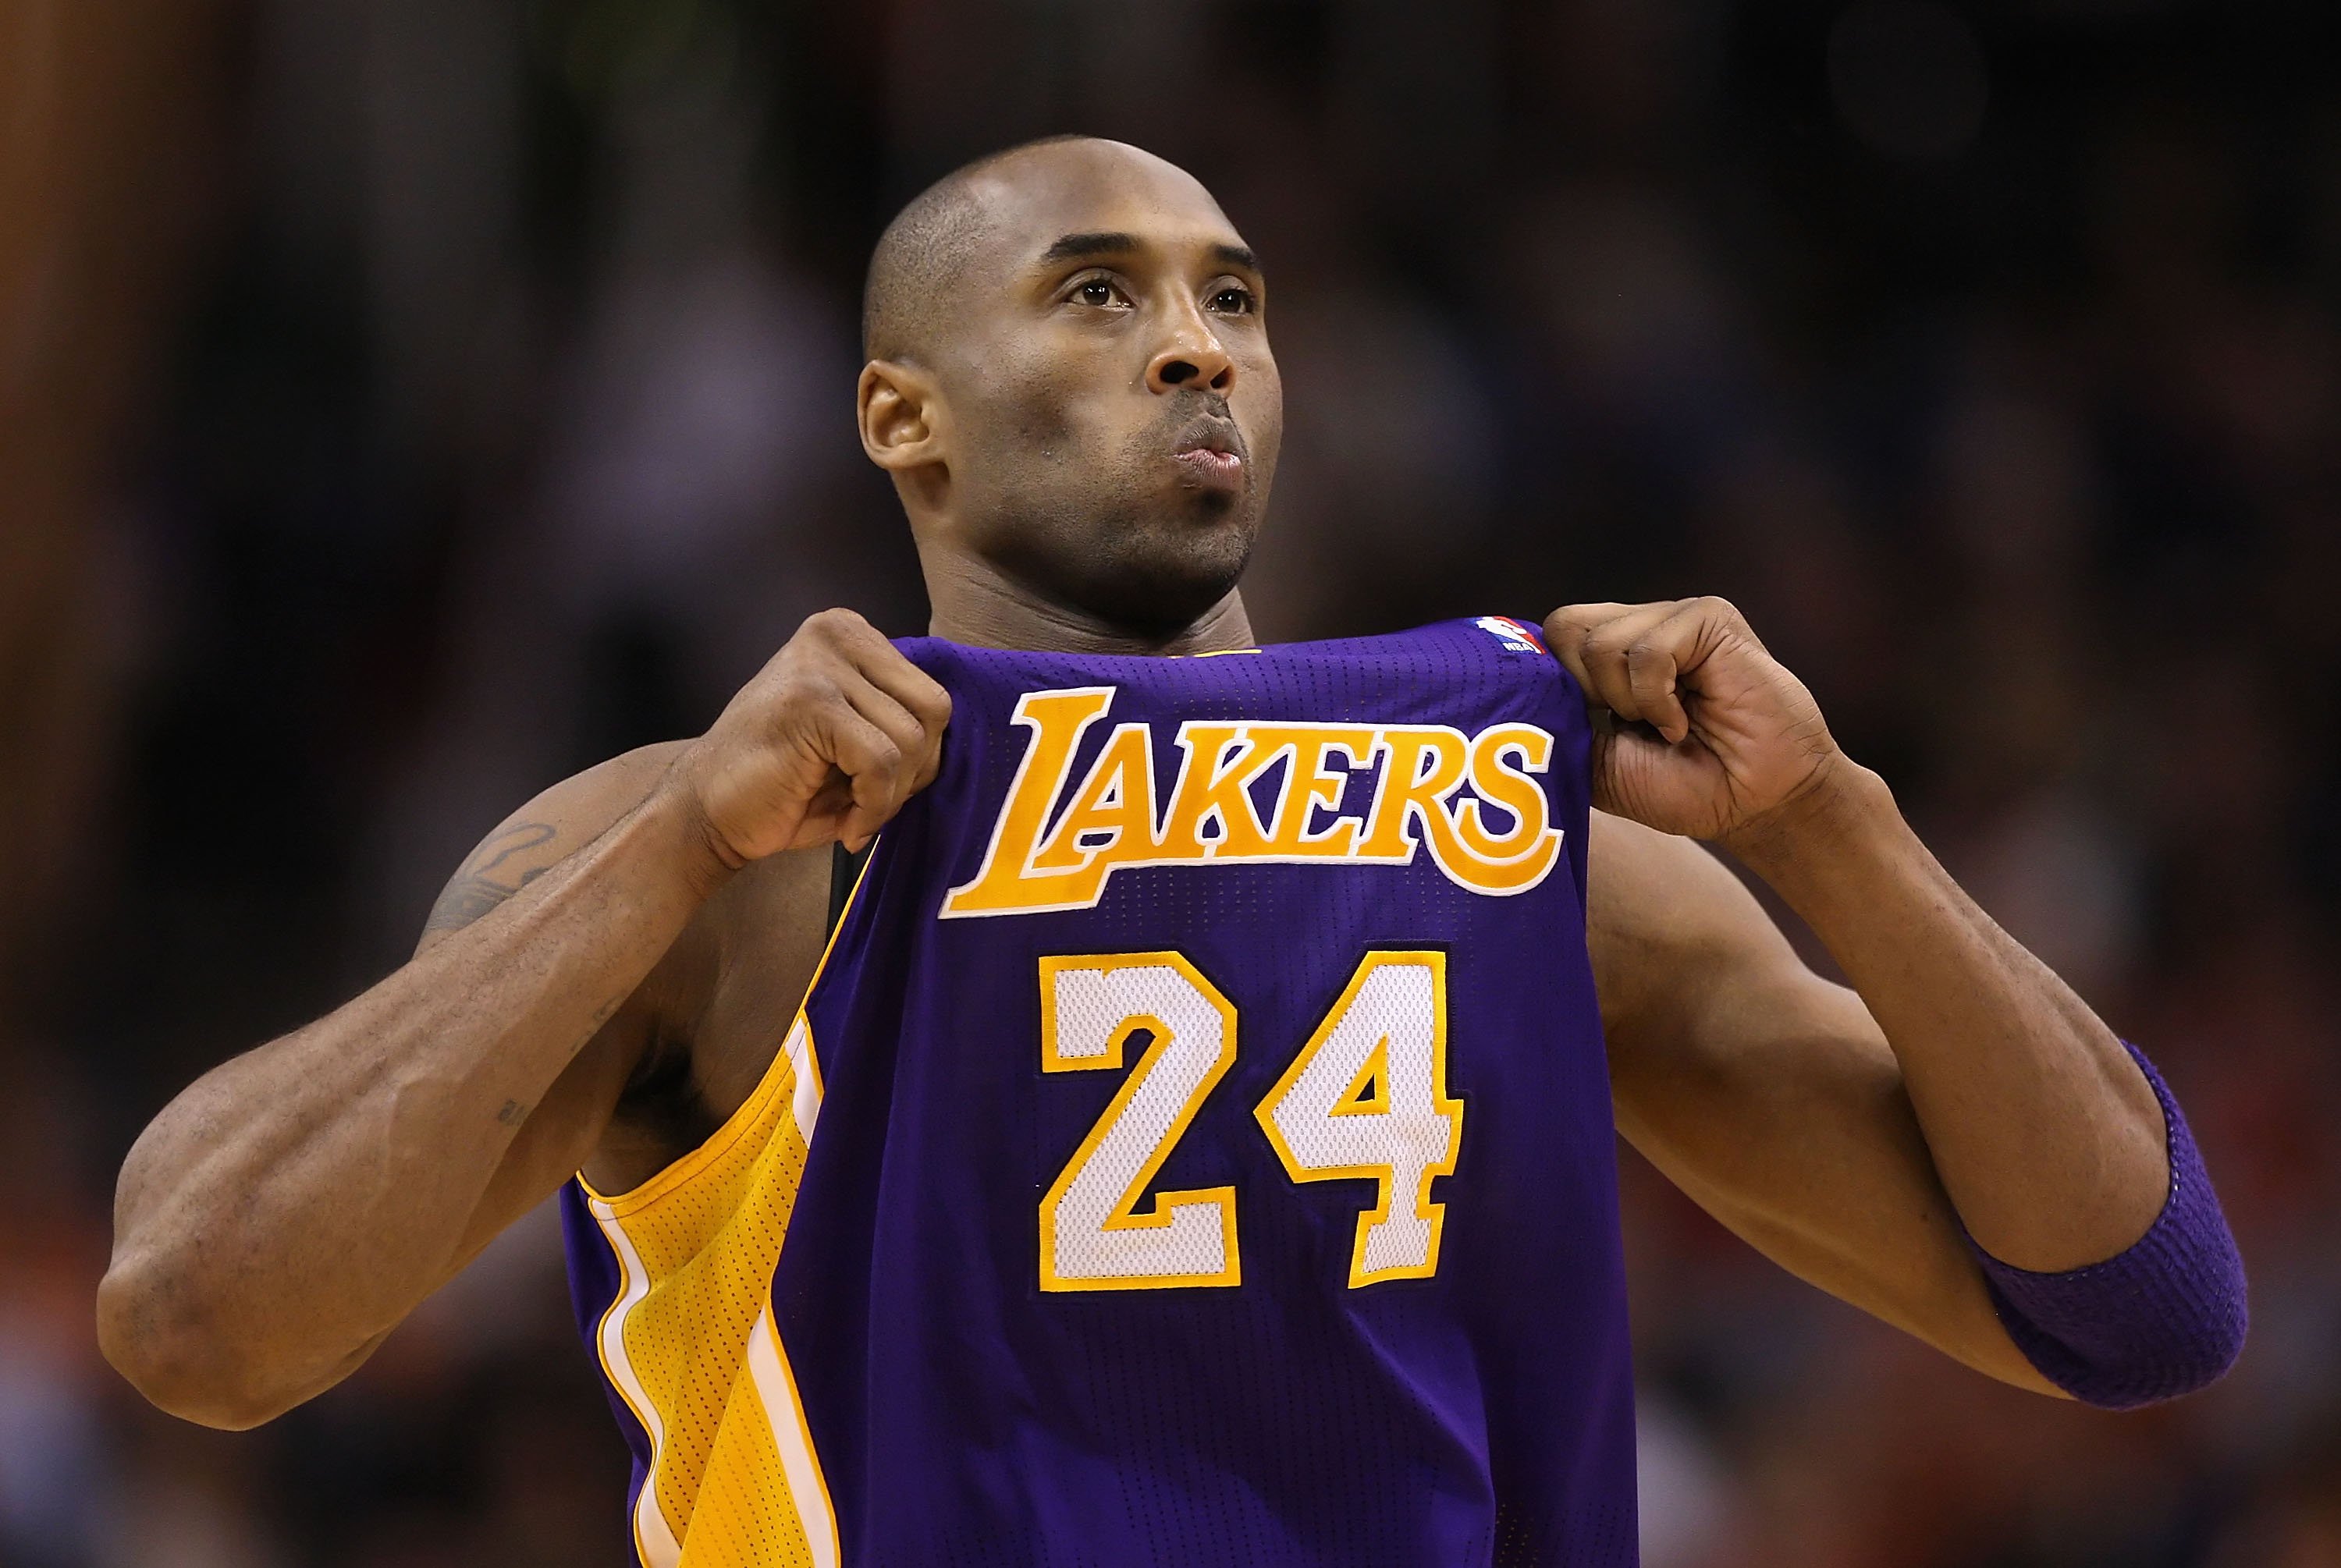  Kobe Bryant #24 of the Los Angeles Lakers adjusts his jersey during the NBA game against the Phoenix Suns at US Airways Center on February 19, 2012 | Photo: GettyImages